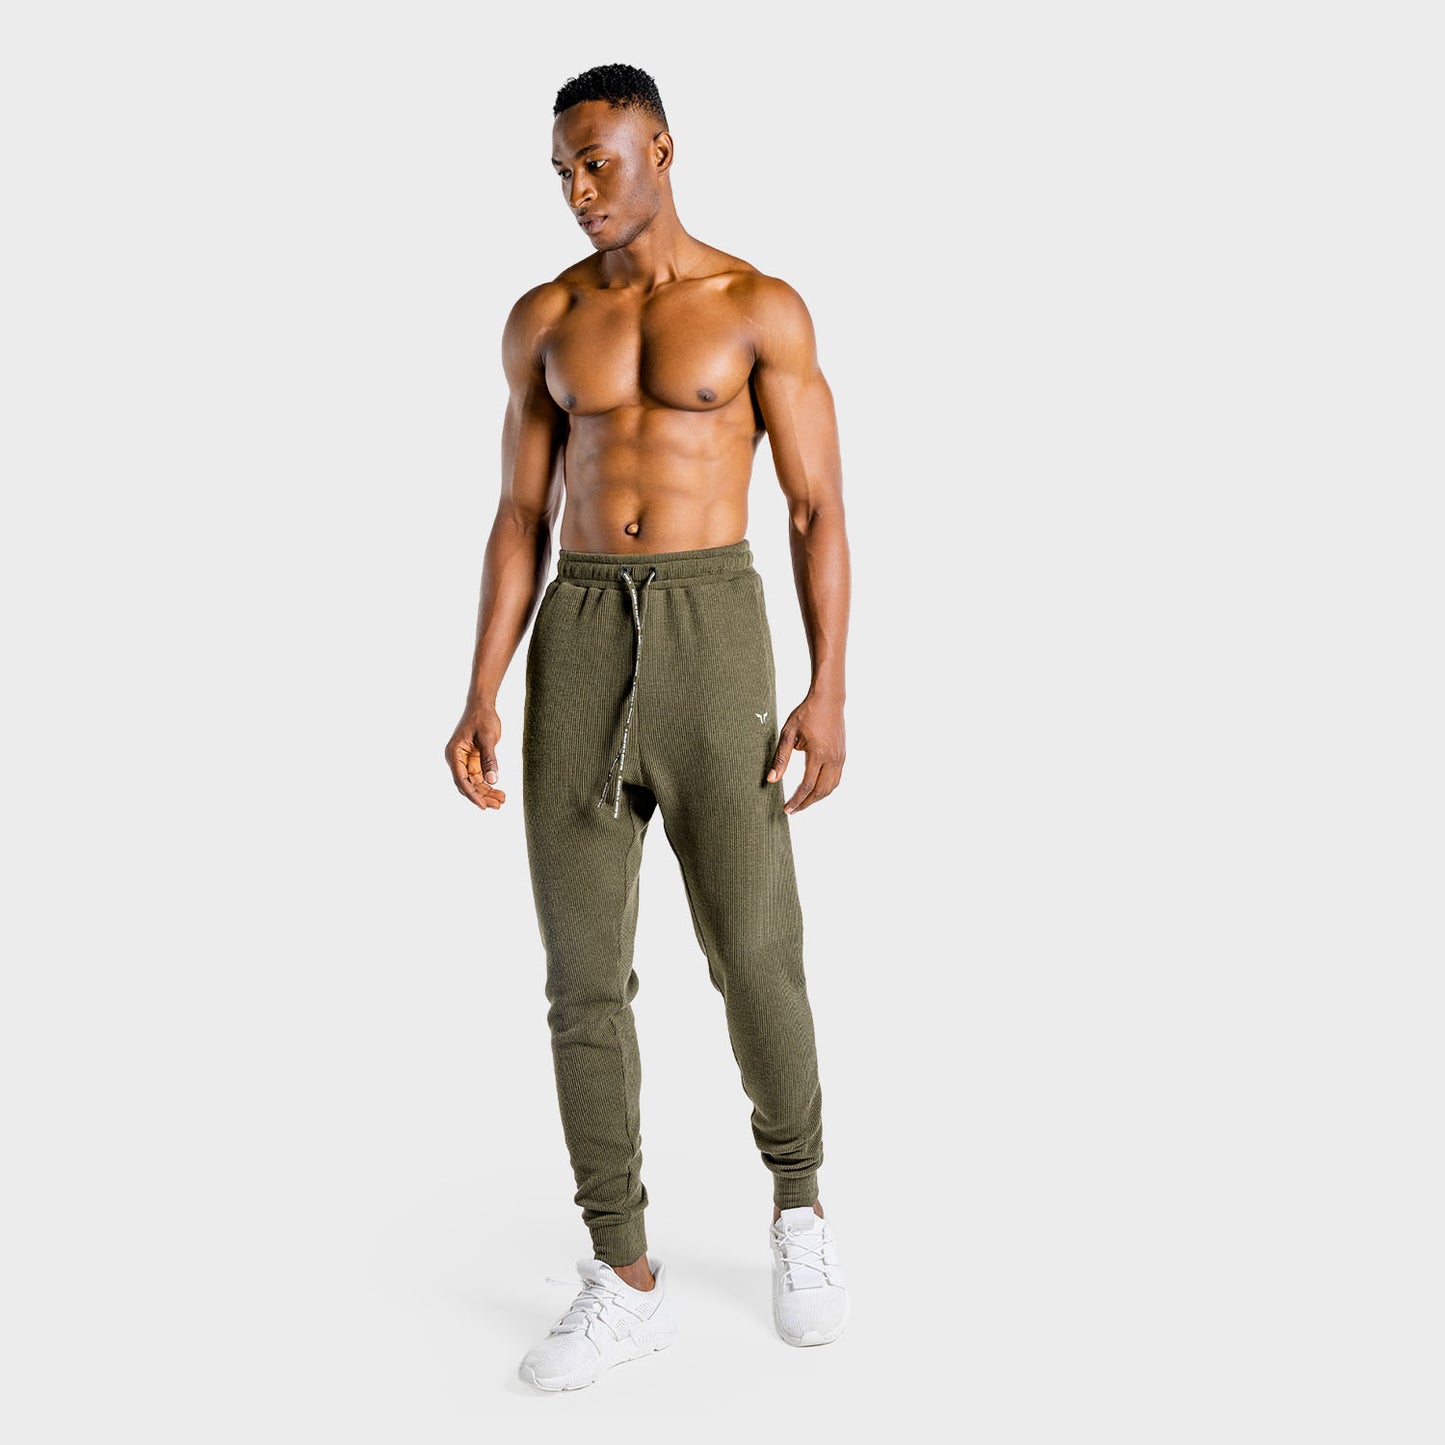 squatwolf-gym-wear-luxe-joggers-green-workout-pants-for-men